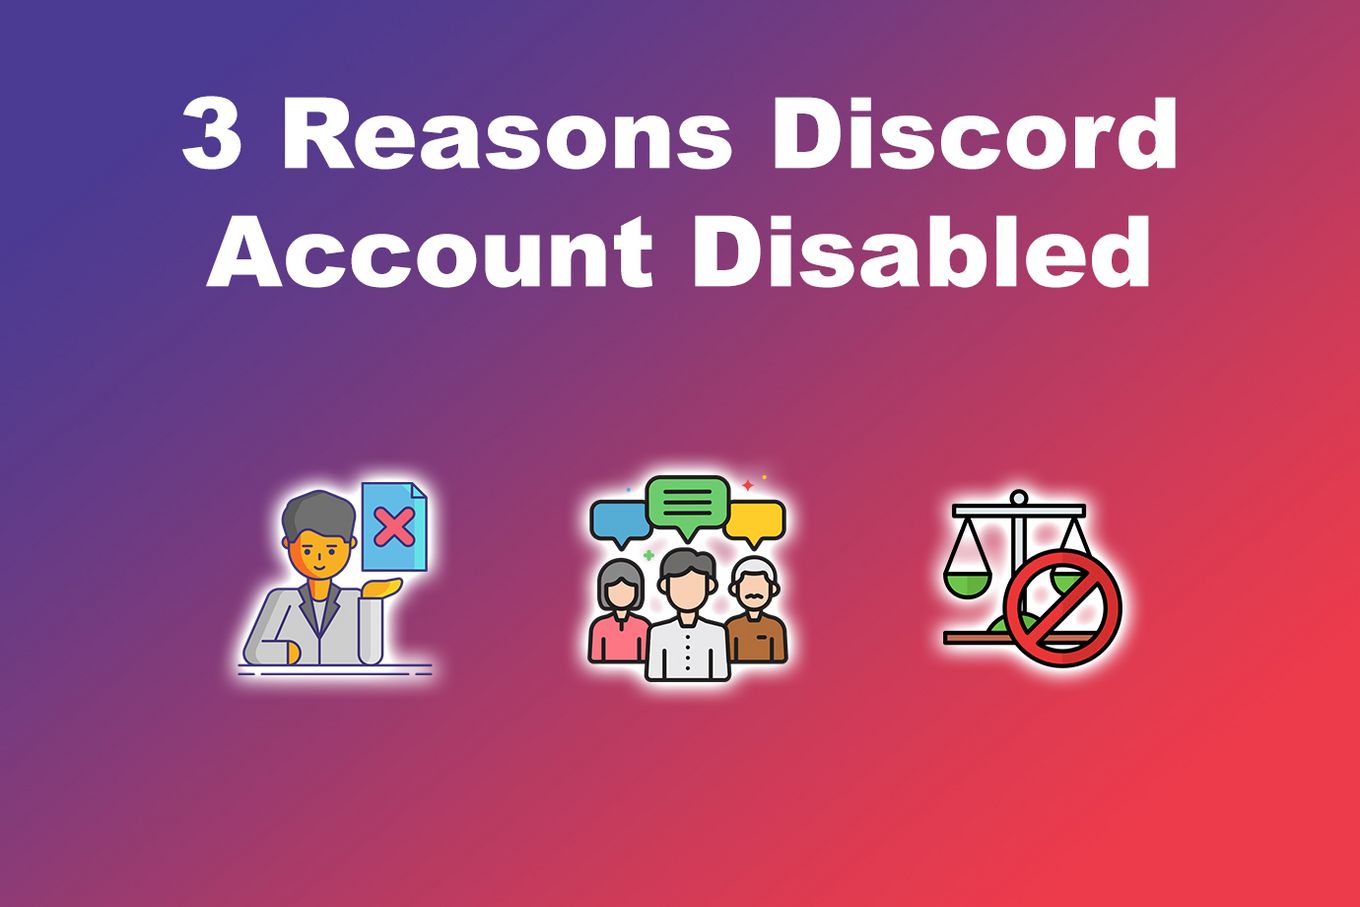 3 Reasons Discord Account Disabled